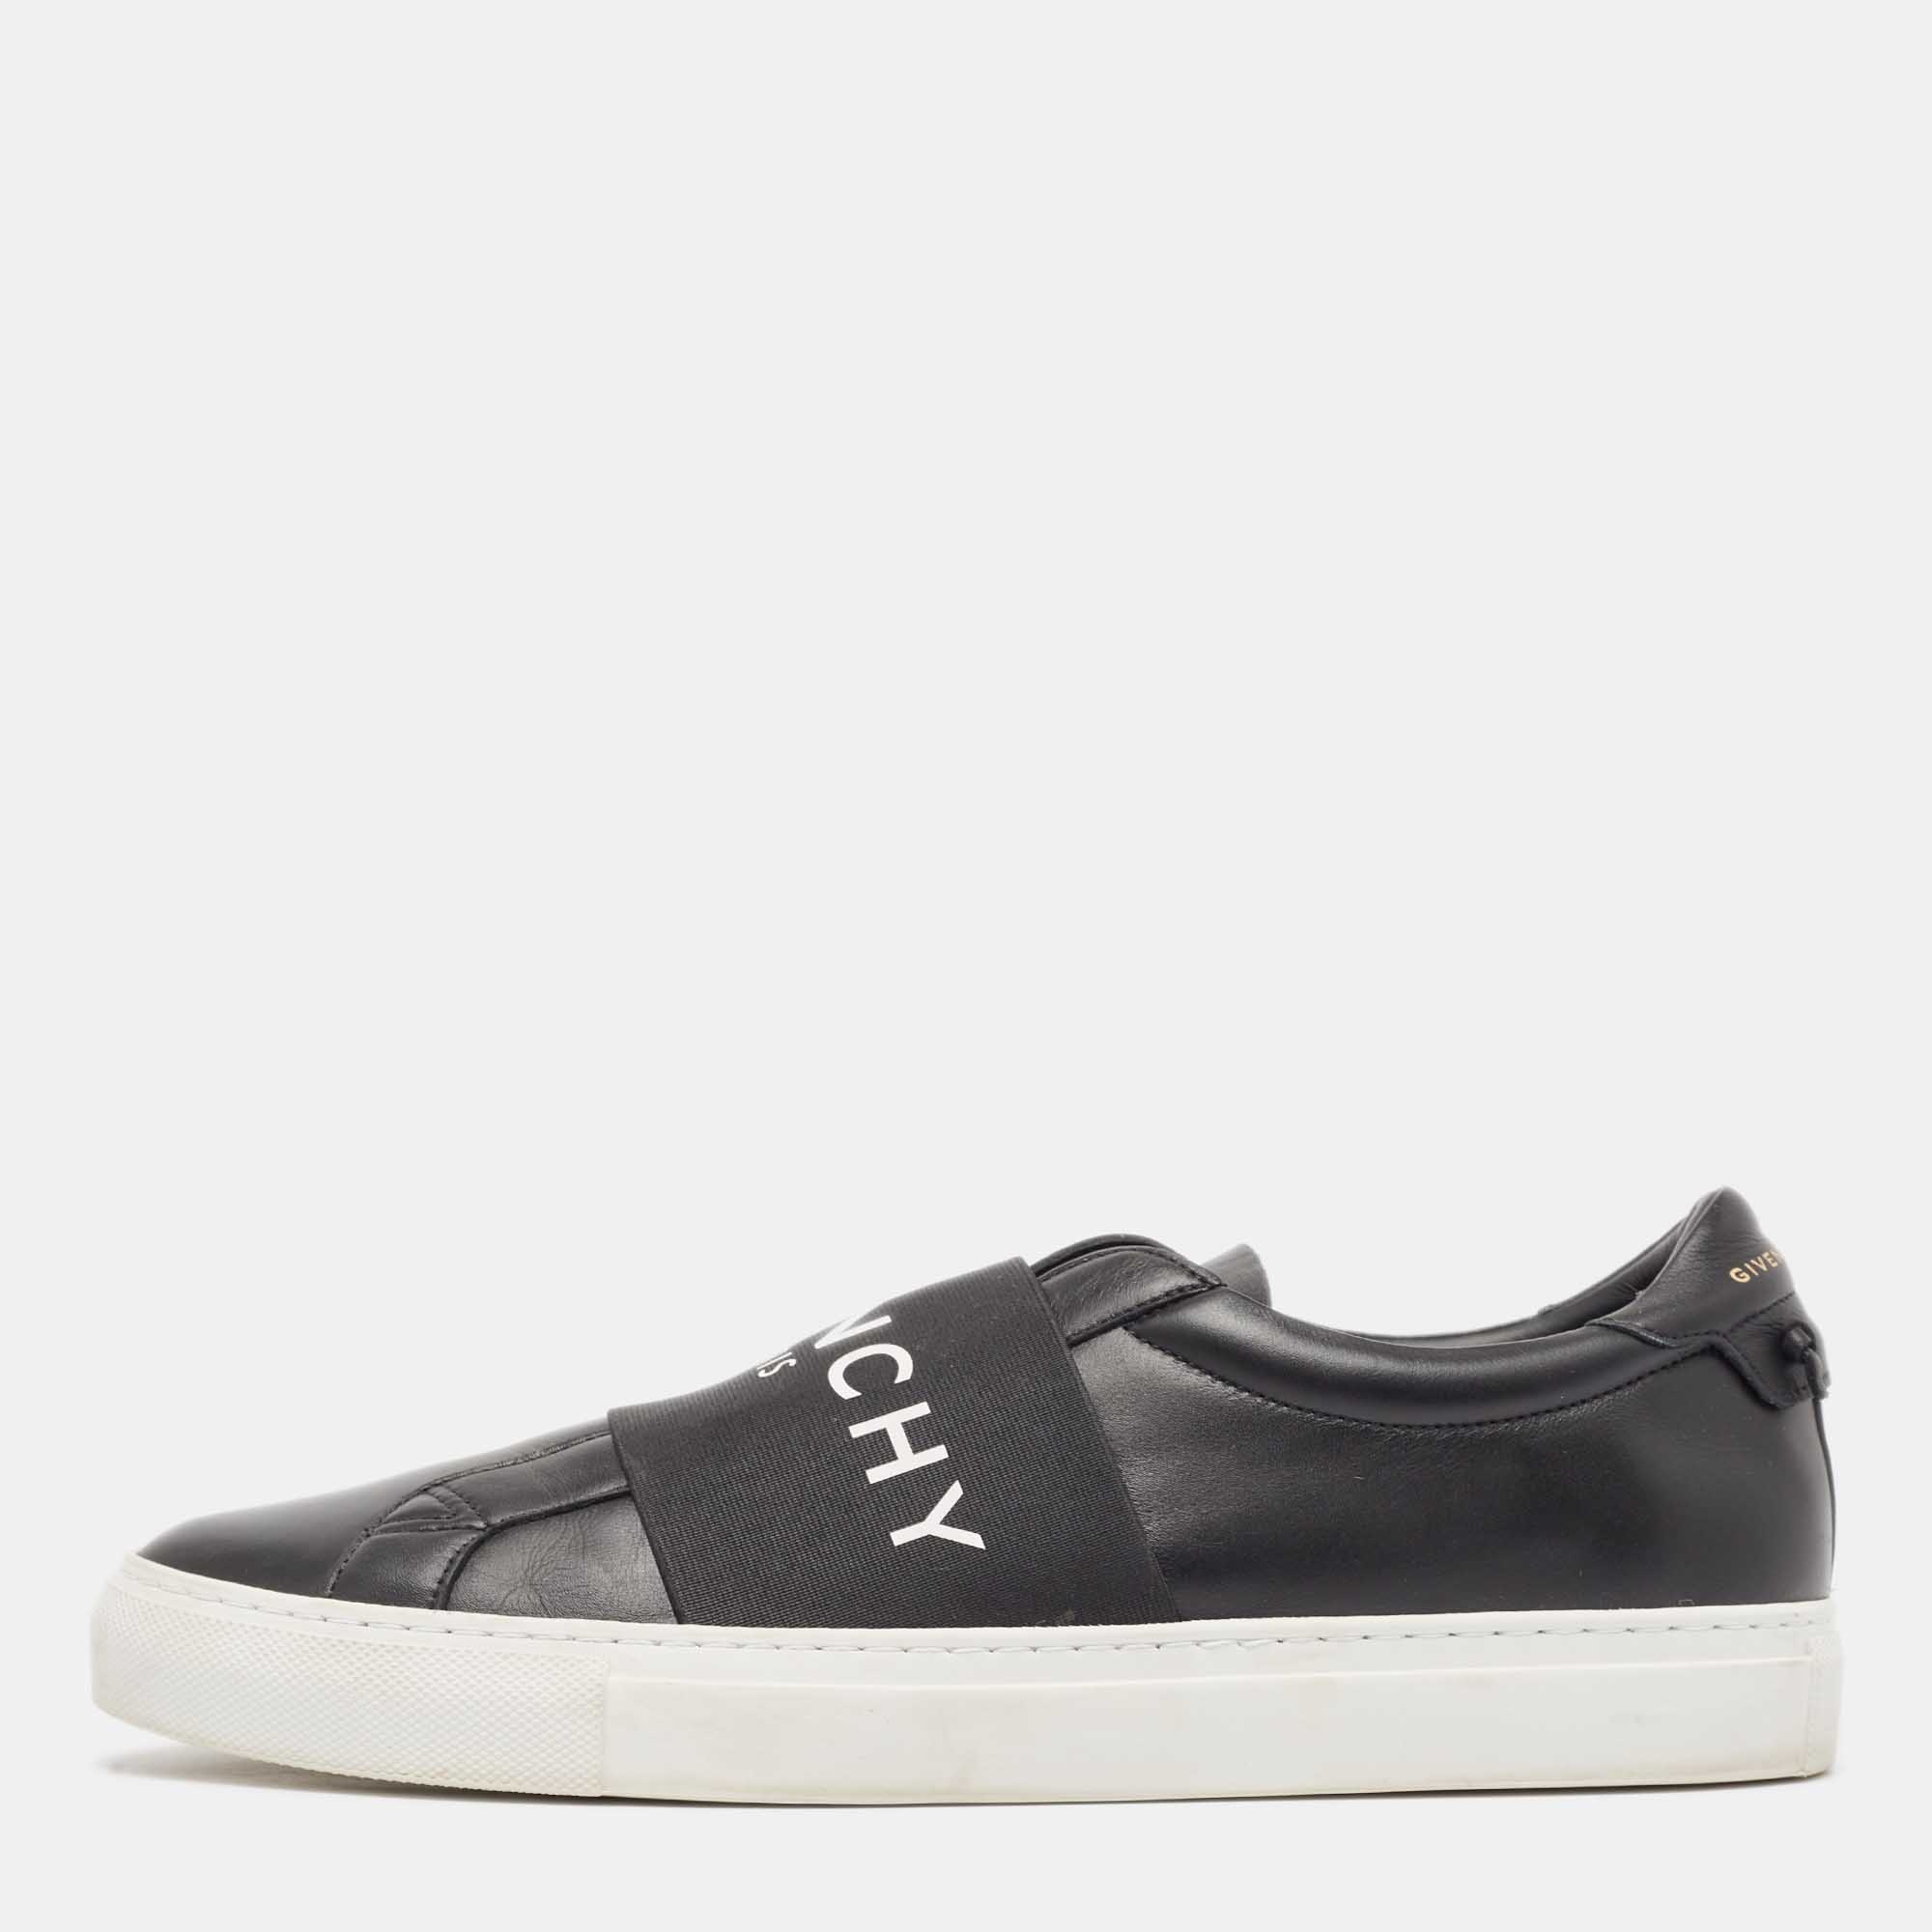 

Givenchy Black Leather Stretch Band Urban Street Slip On Sneakers Size